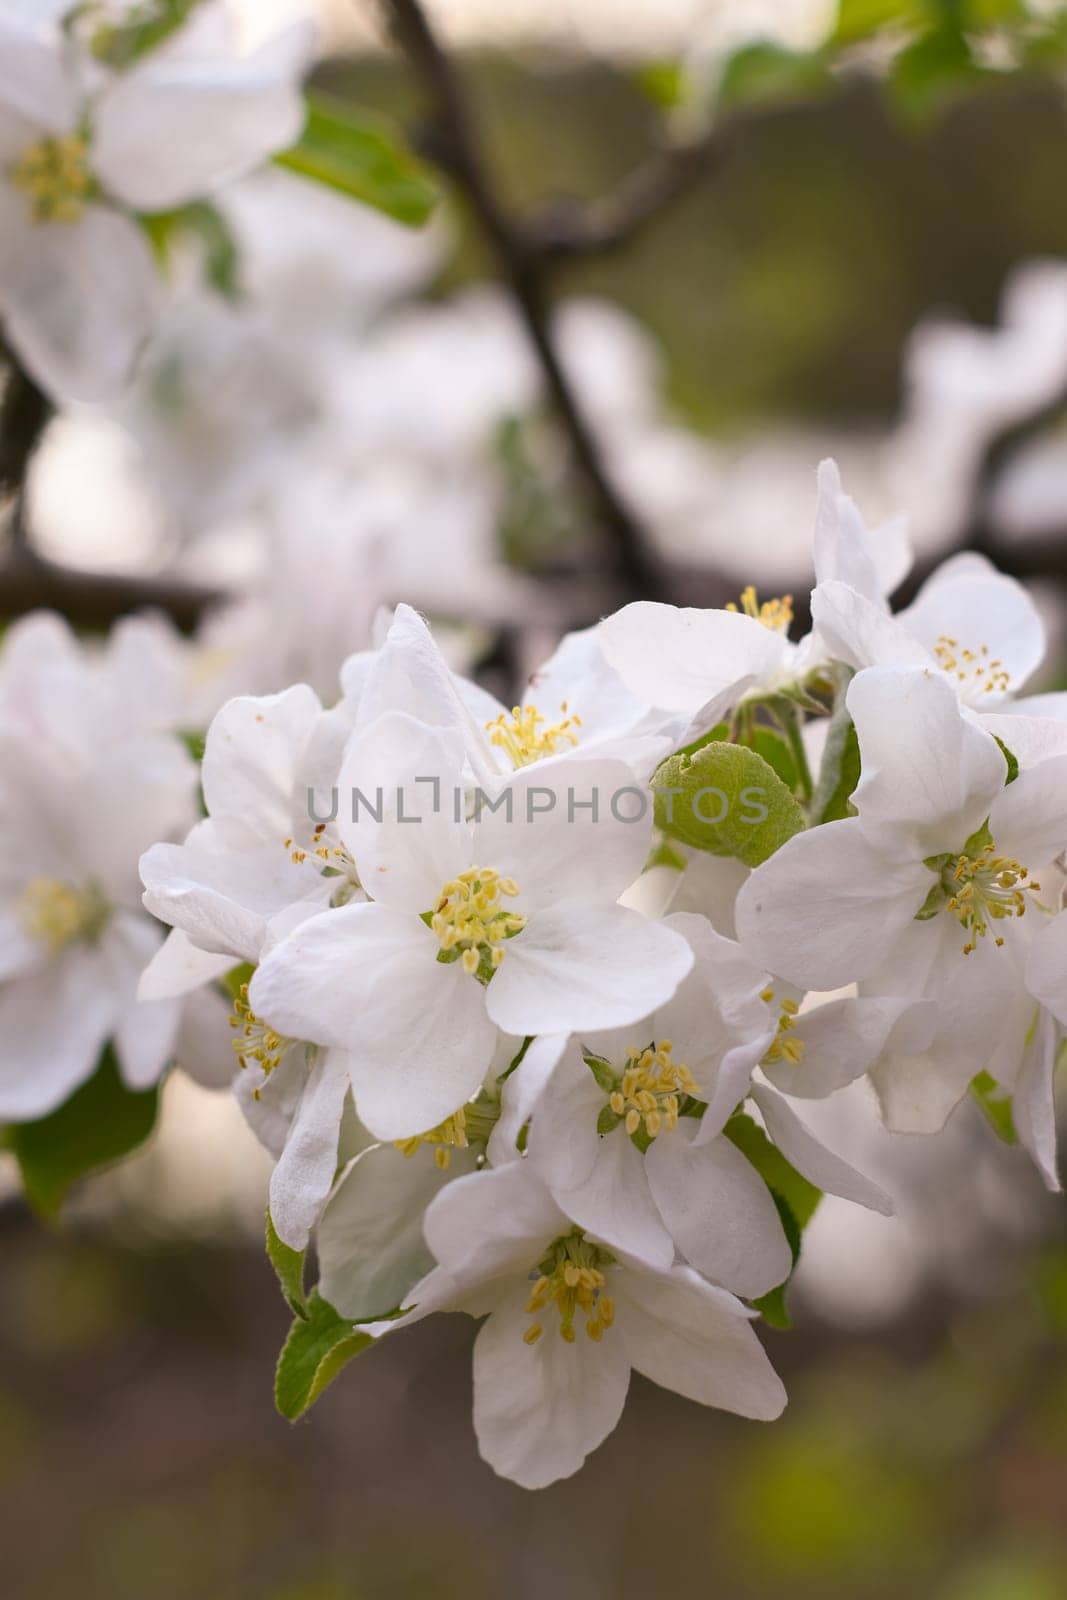 blooming apple tree branch with white flowers, early spring, beautiful nature, floral background. High quality photo